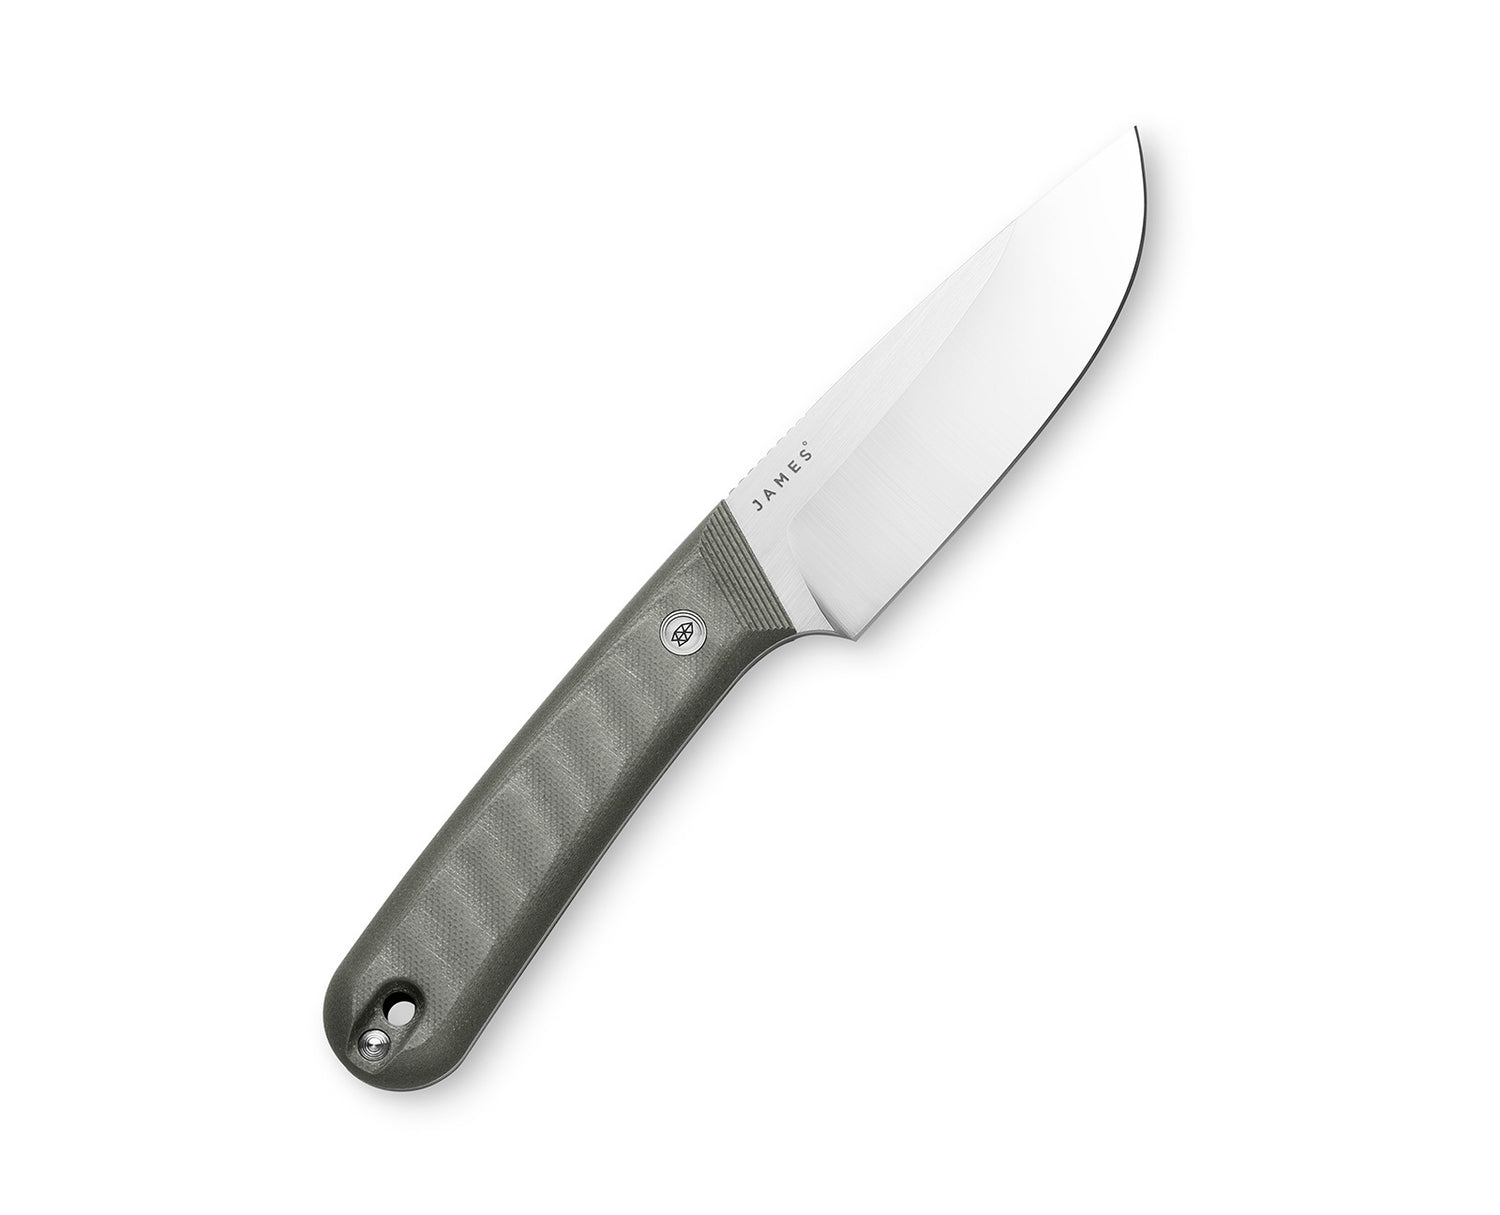 The Hells Canyon knife with primer gray handle and stainless steel blade.